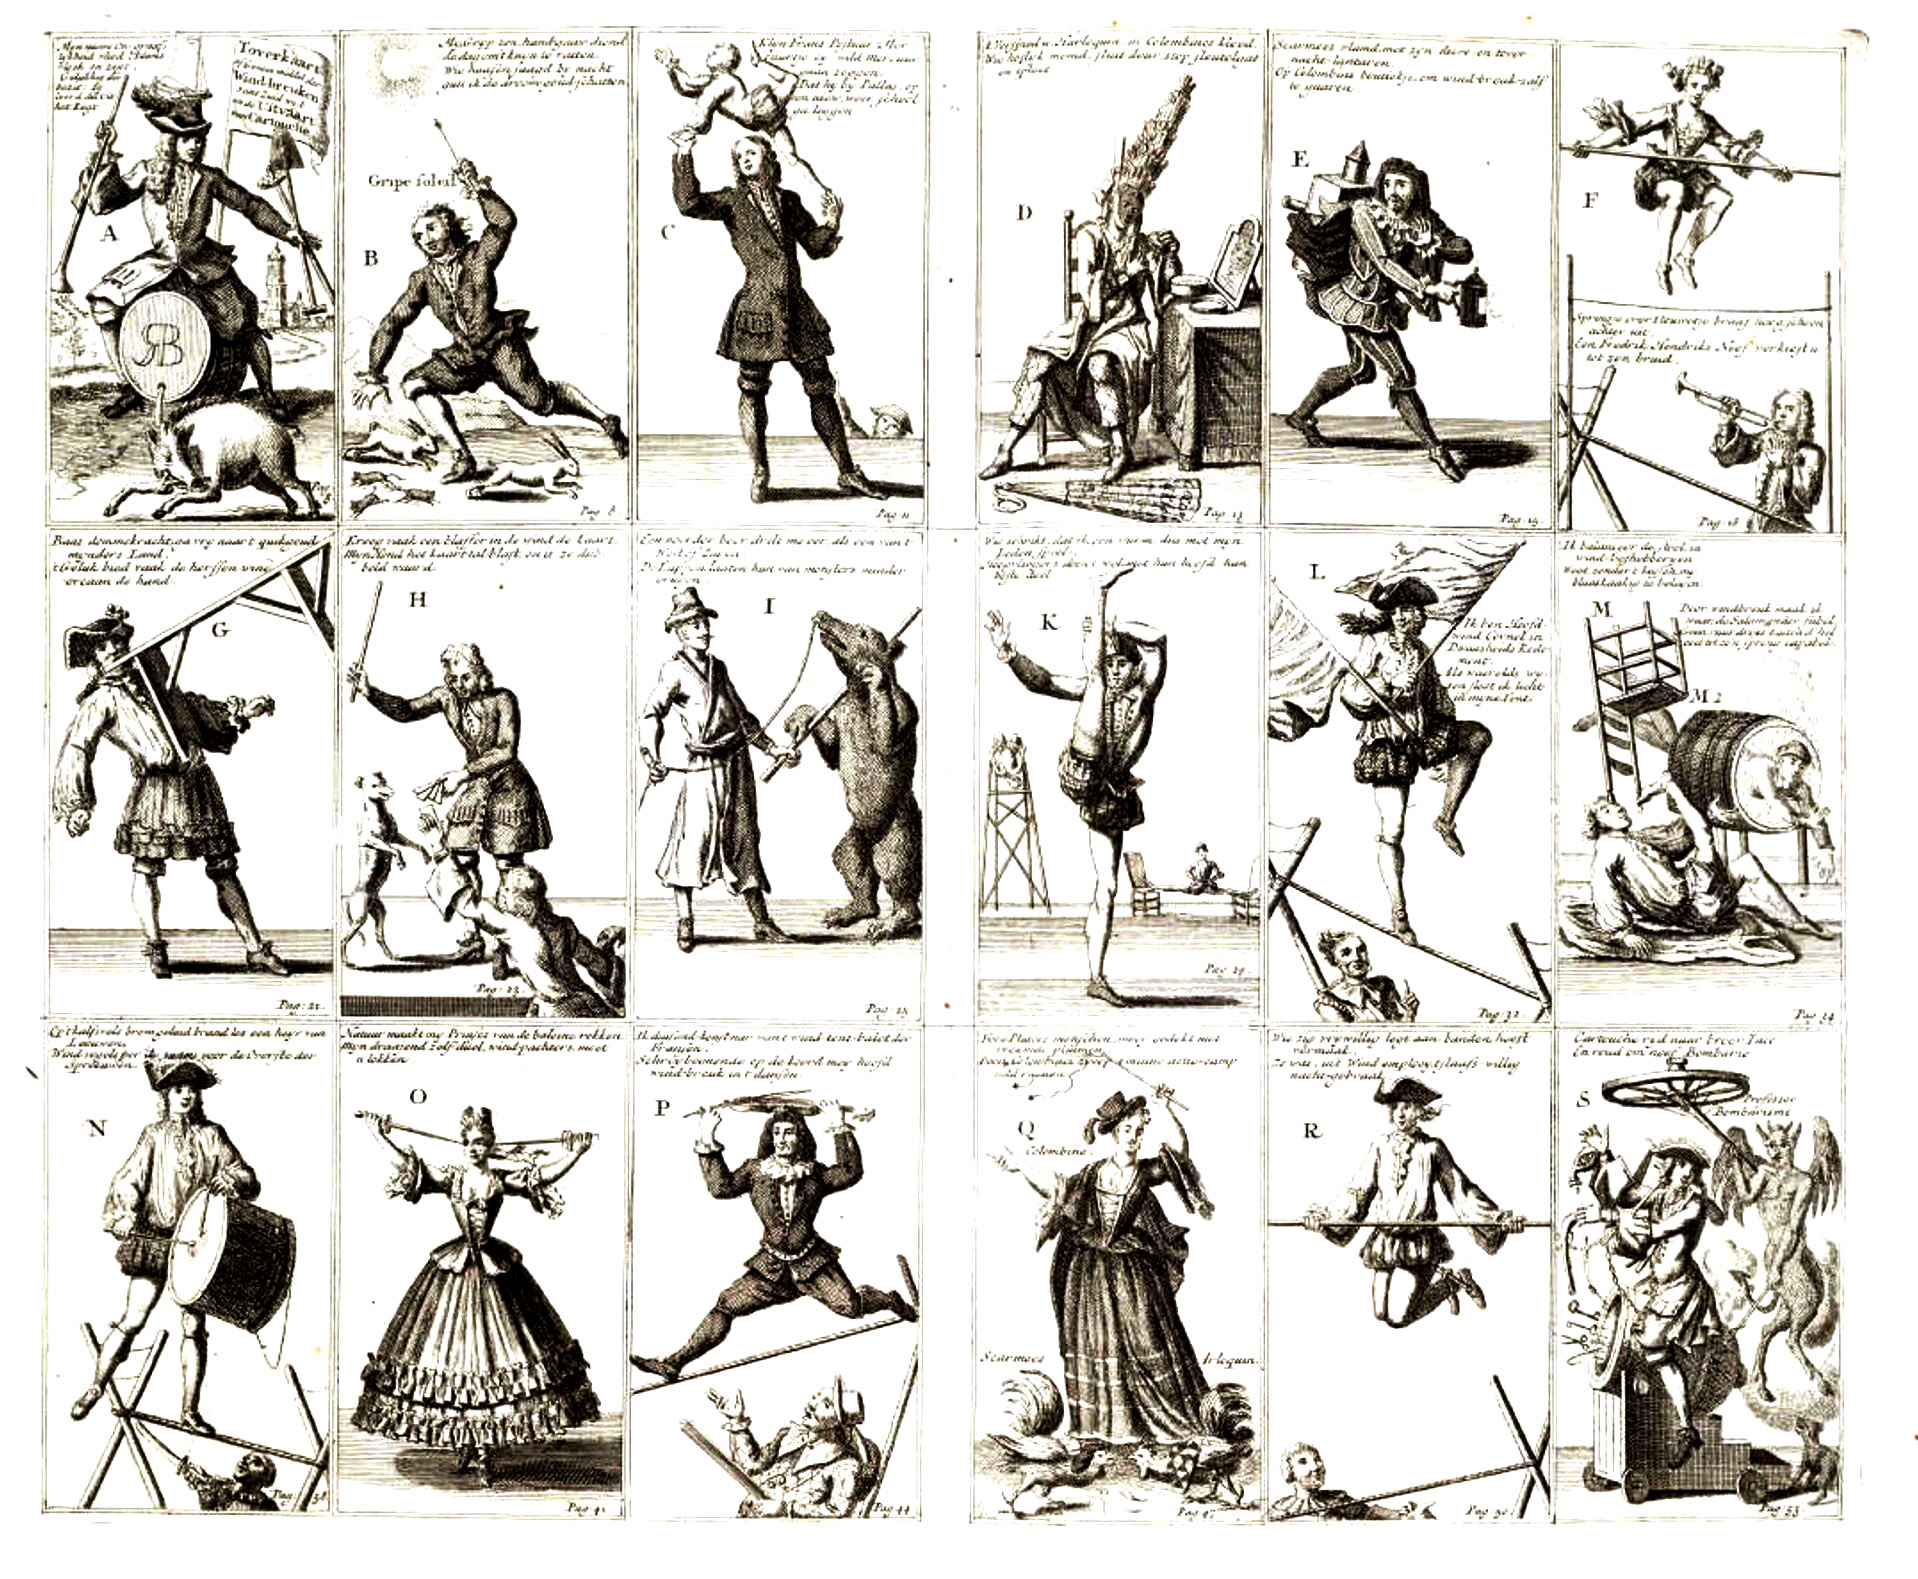 Acrobats forming letters of the alphabet, Holland 1720. Scan of 2 d image in the public domain believed to be free to use without restriction in the US.